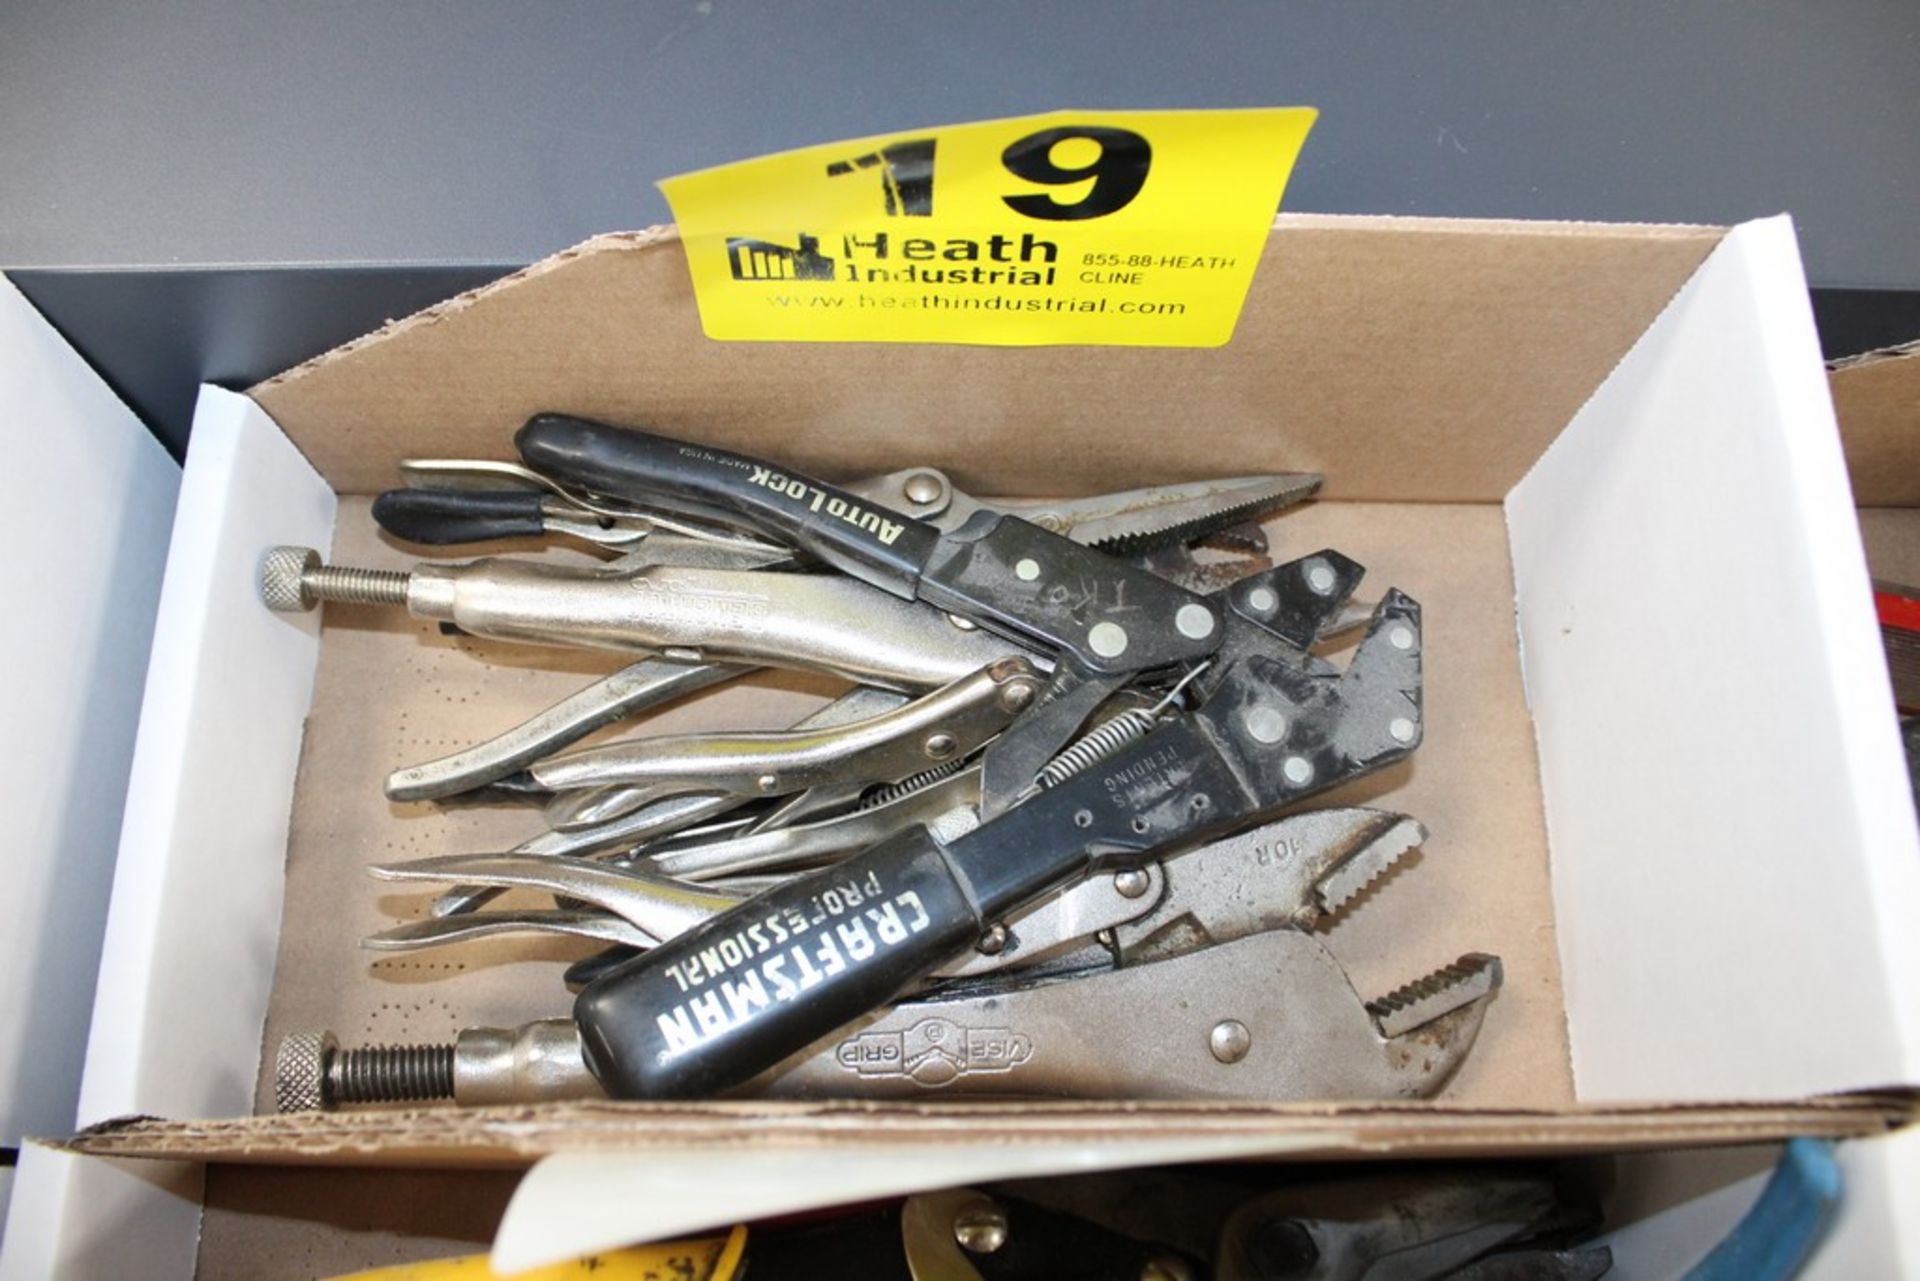 ASSORTED VISE GRIPS AND PLIERS IN BOX